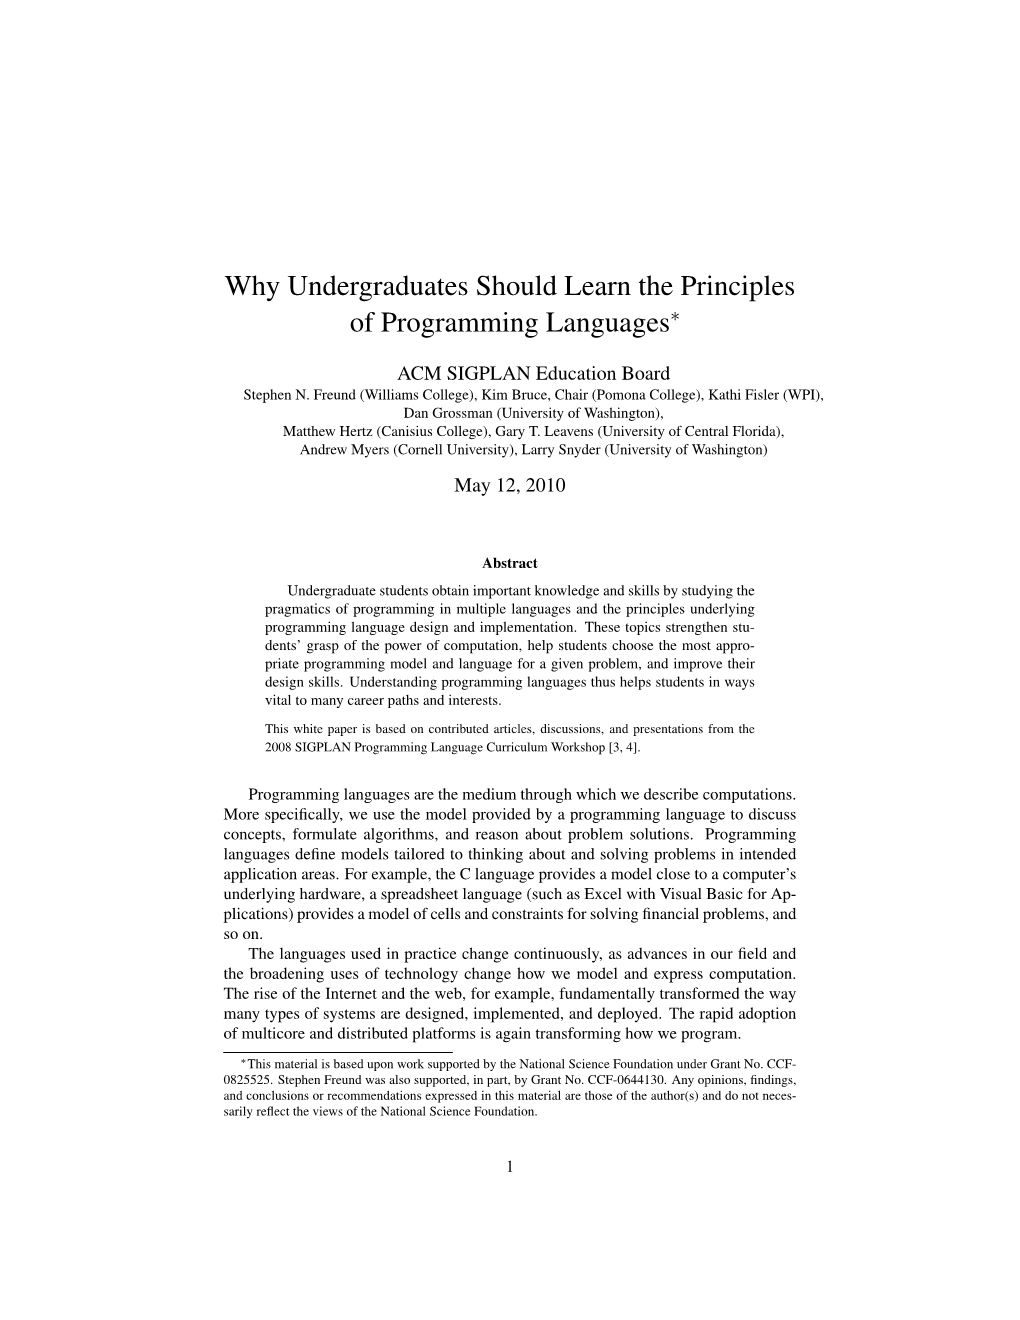 Why Undergraduates Should Learn the Principles of Programming Languages∗